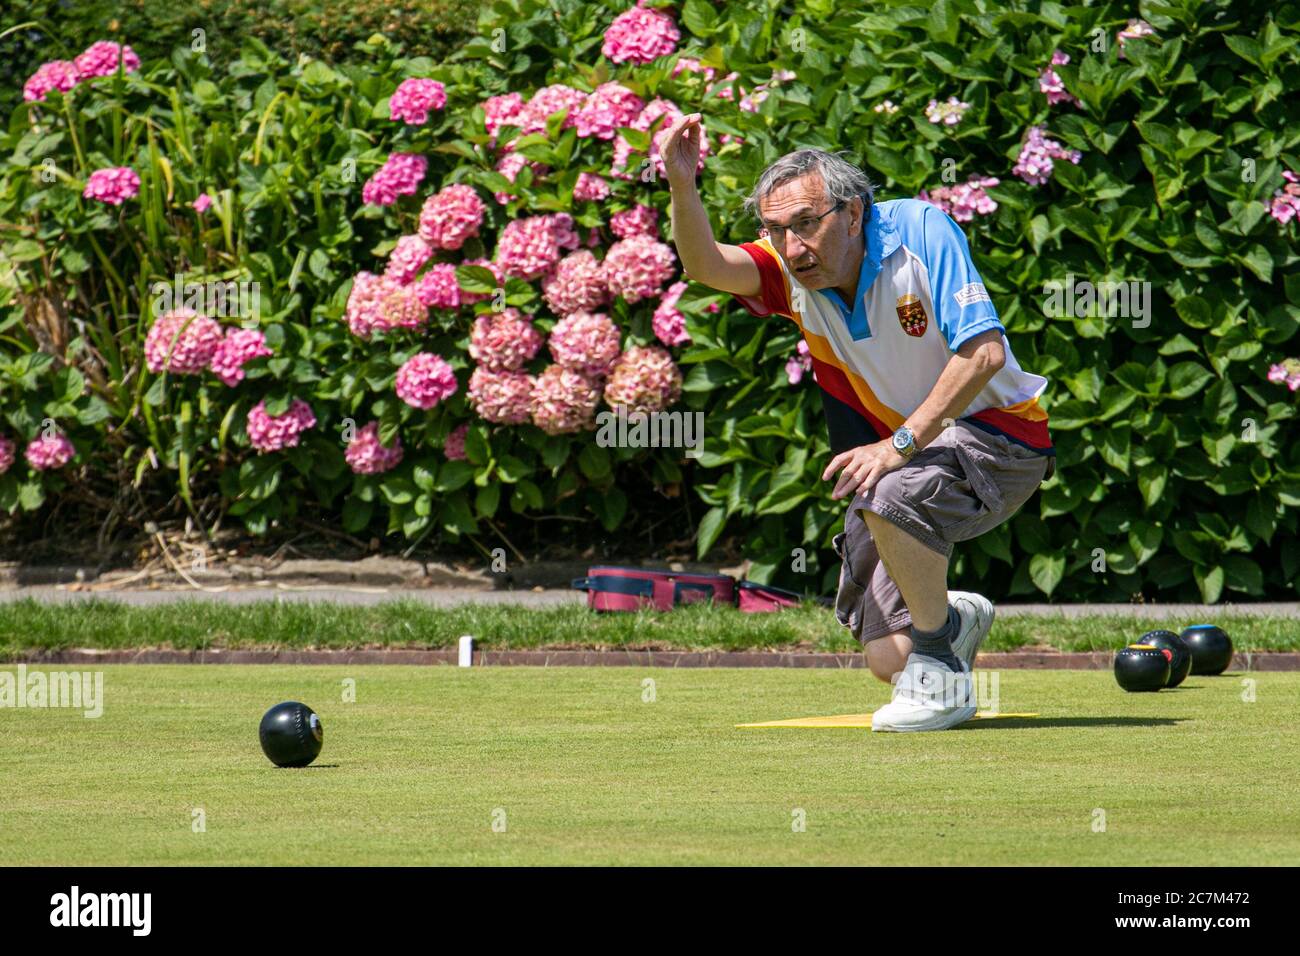 WIMBLEDON LONDON UK. 18th July, 2020. Members of the Wimbledon Park Bowls Club enjoy bowling outdoors on a hot summer day as lockdown restrictions are lifted and sport facilities reopen Credit: amer ghazzal/Alamy Live News Stock Photo